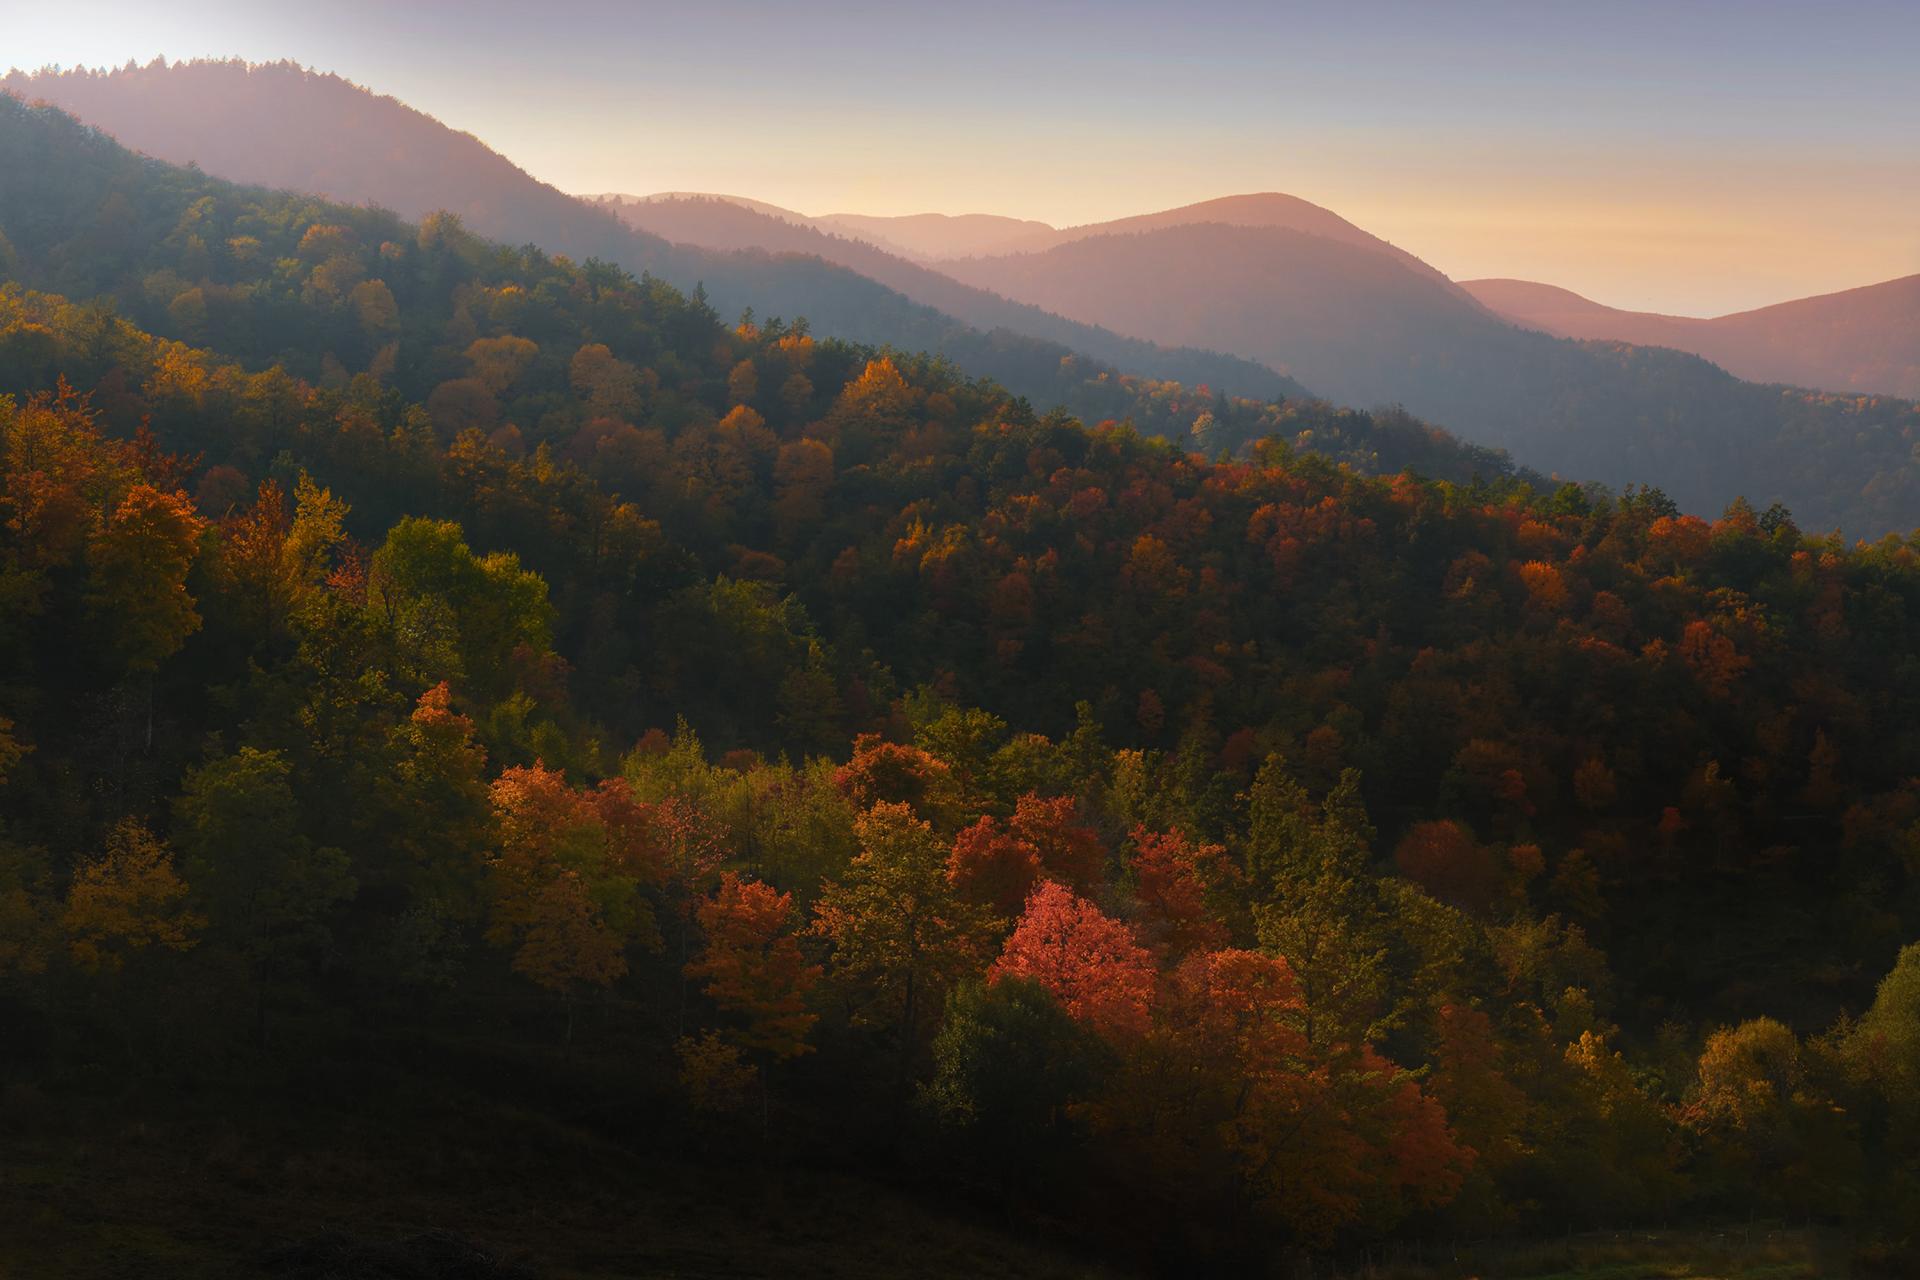 New York Photography Awards Winner - Fall Foliage in Foreste Casentinesi National Park